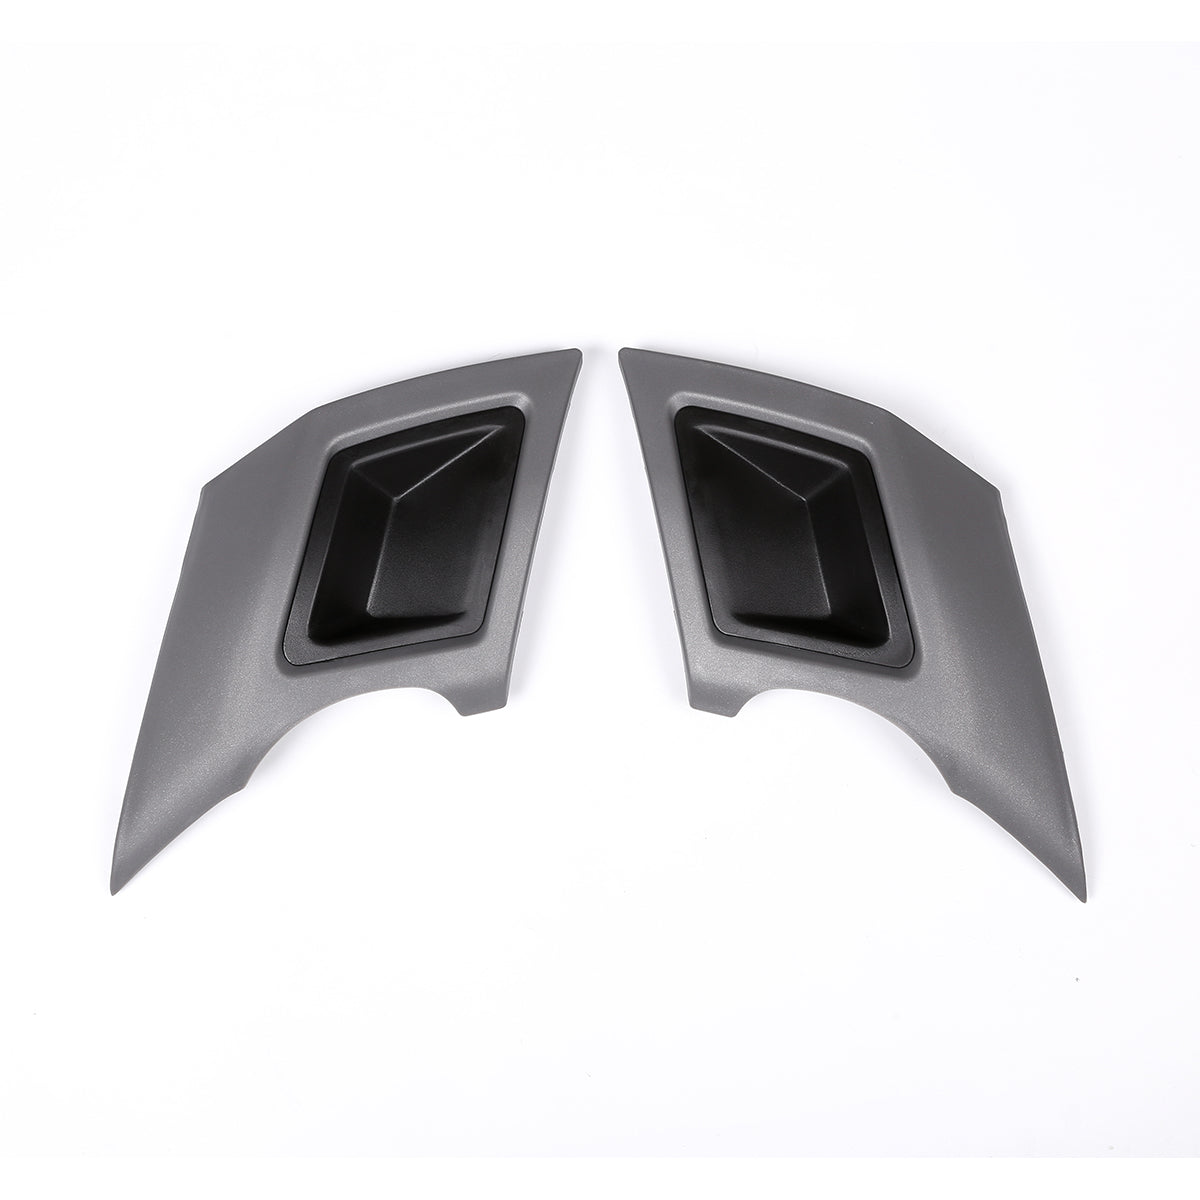 2Pcs Car Rear Bumper Exhaust Pipe Cover Trim Bumper Protector Gray Silver For Land Rover Discovery - Auto GoShop